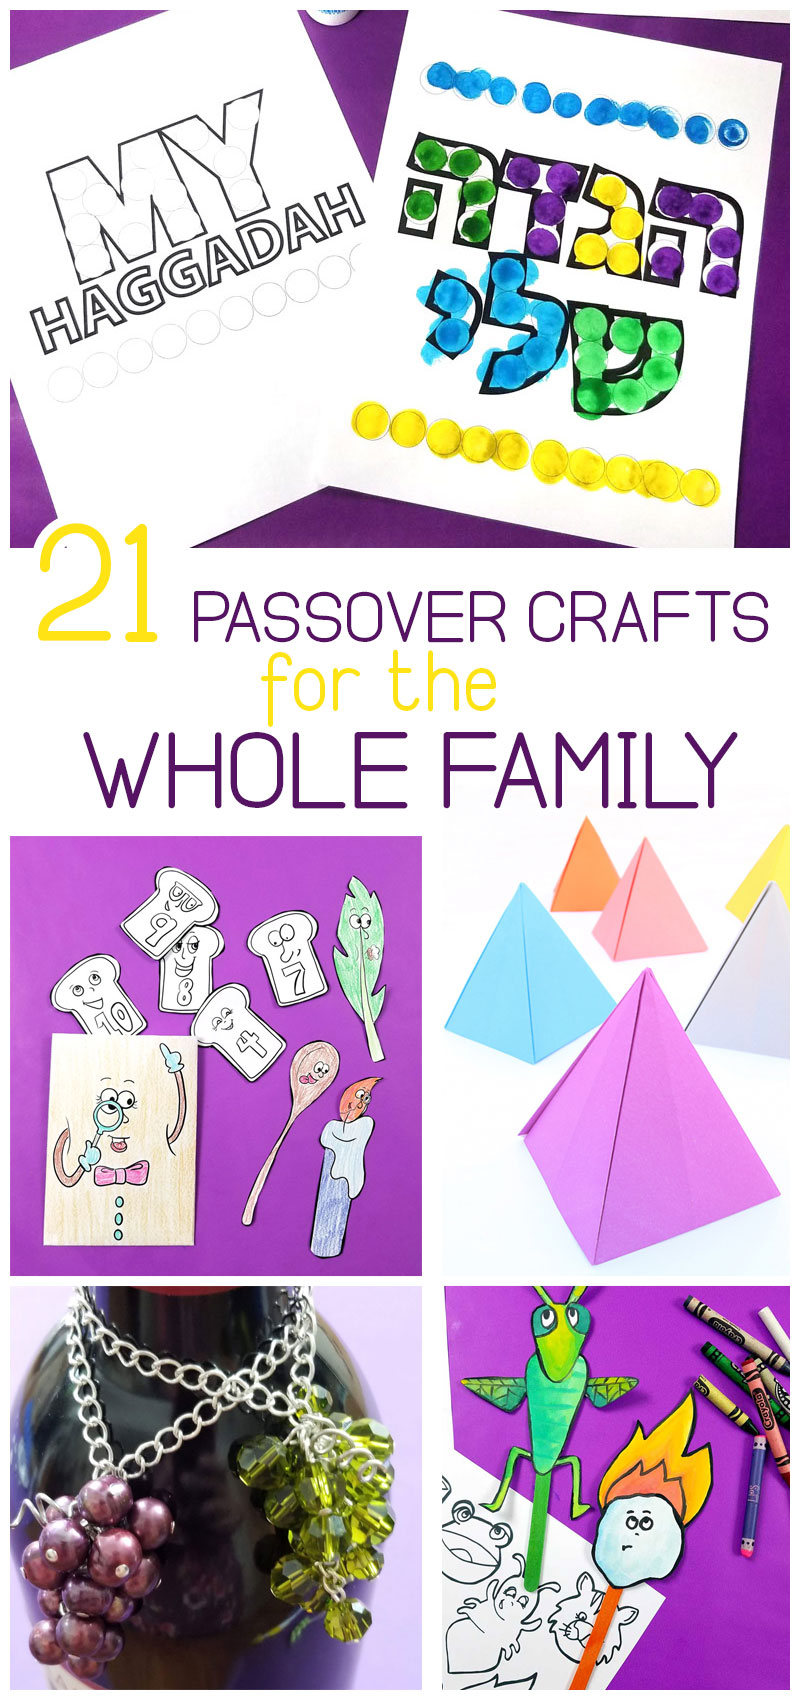 Passover crafts for the whole family collage